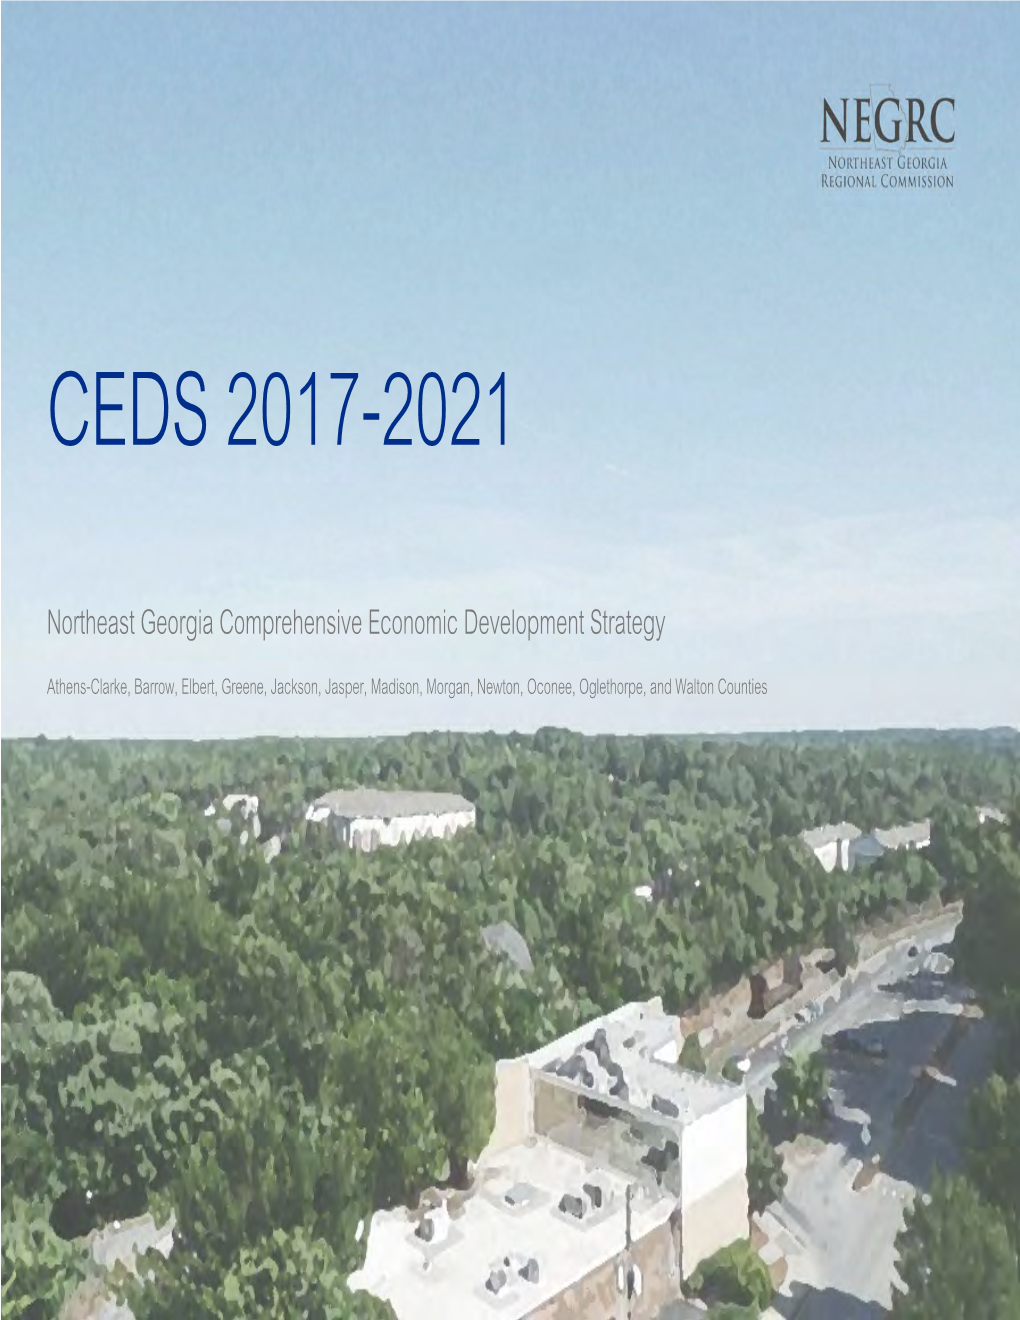 Comprehensive Economic Development Strategy (CEDS) for Northeast Georgia, with Guidance from Local Public and Private Stakeholders